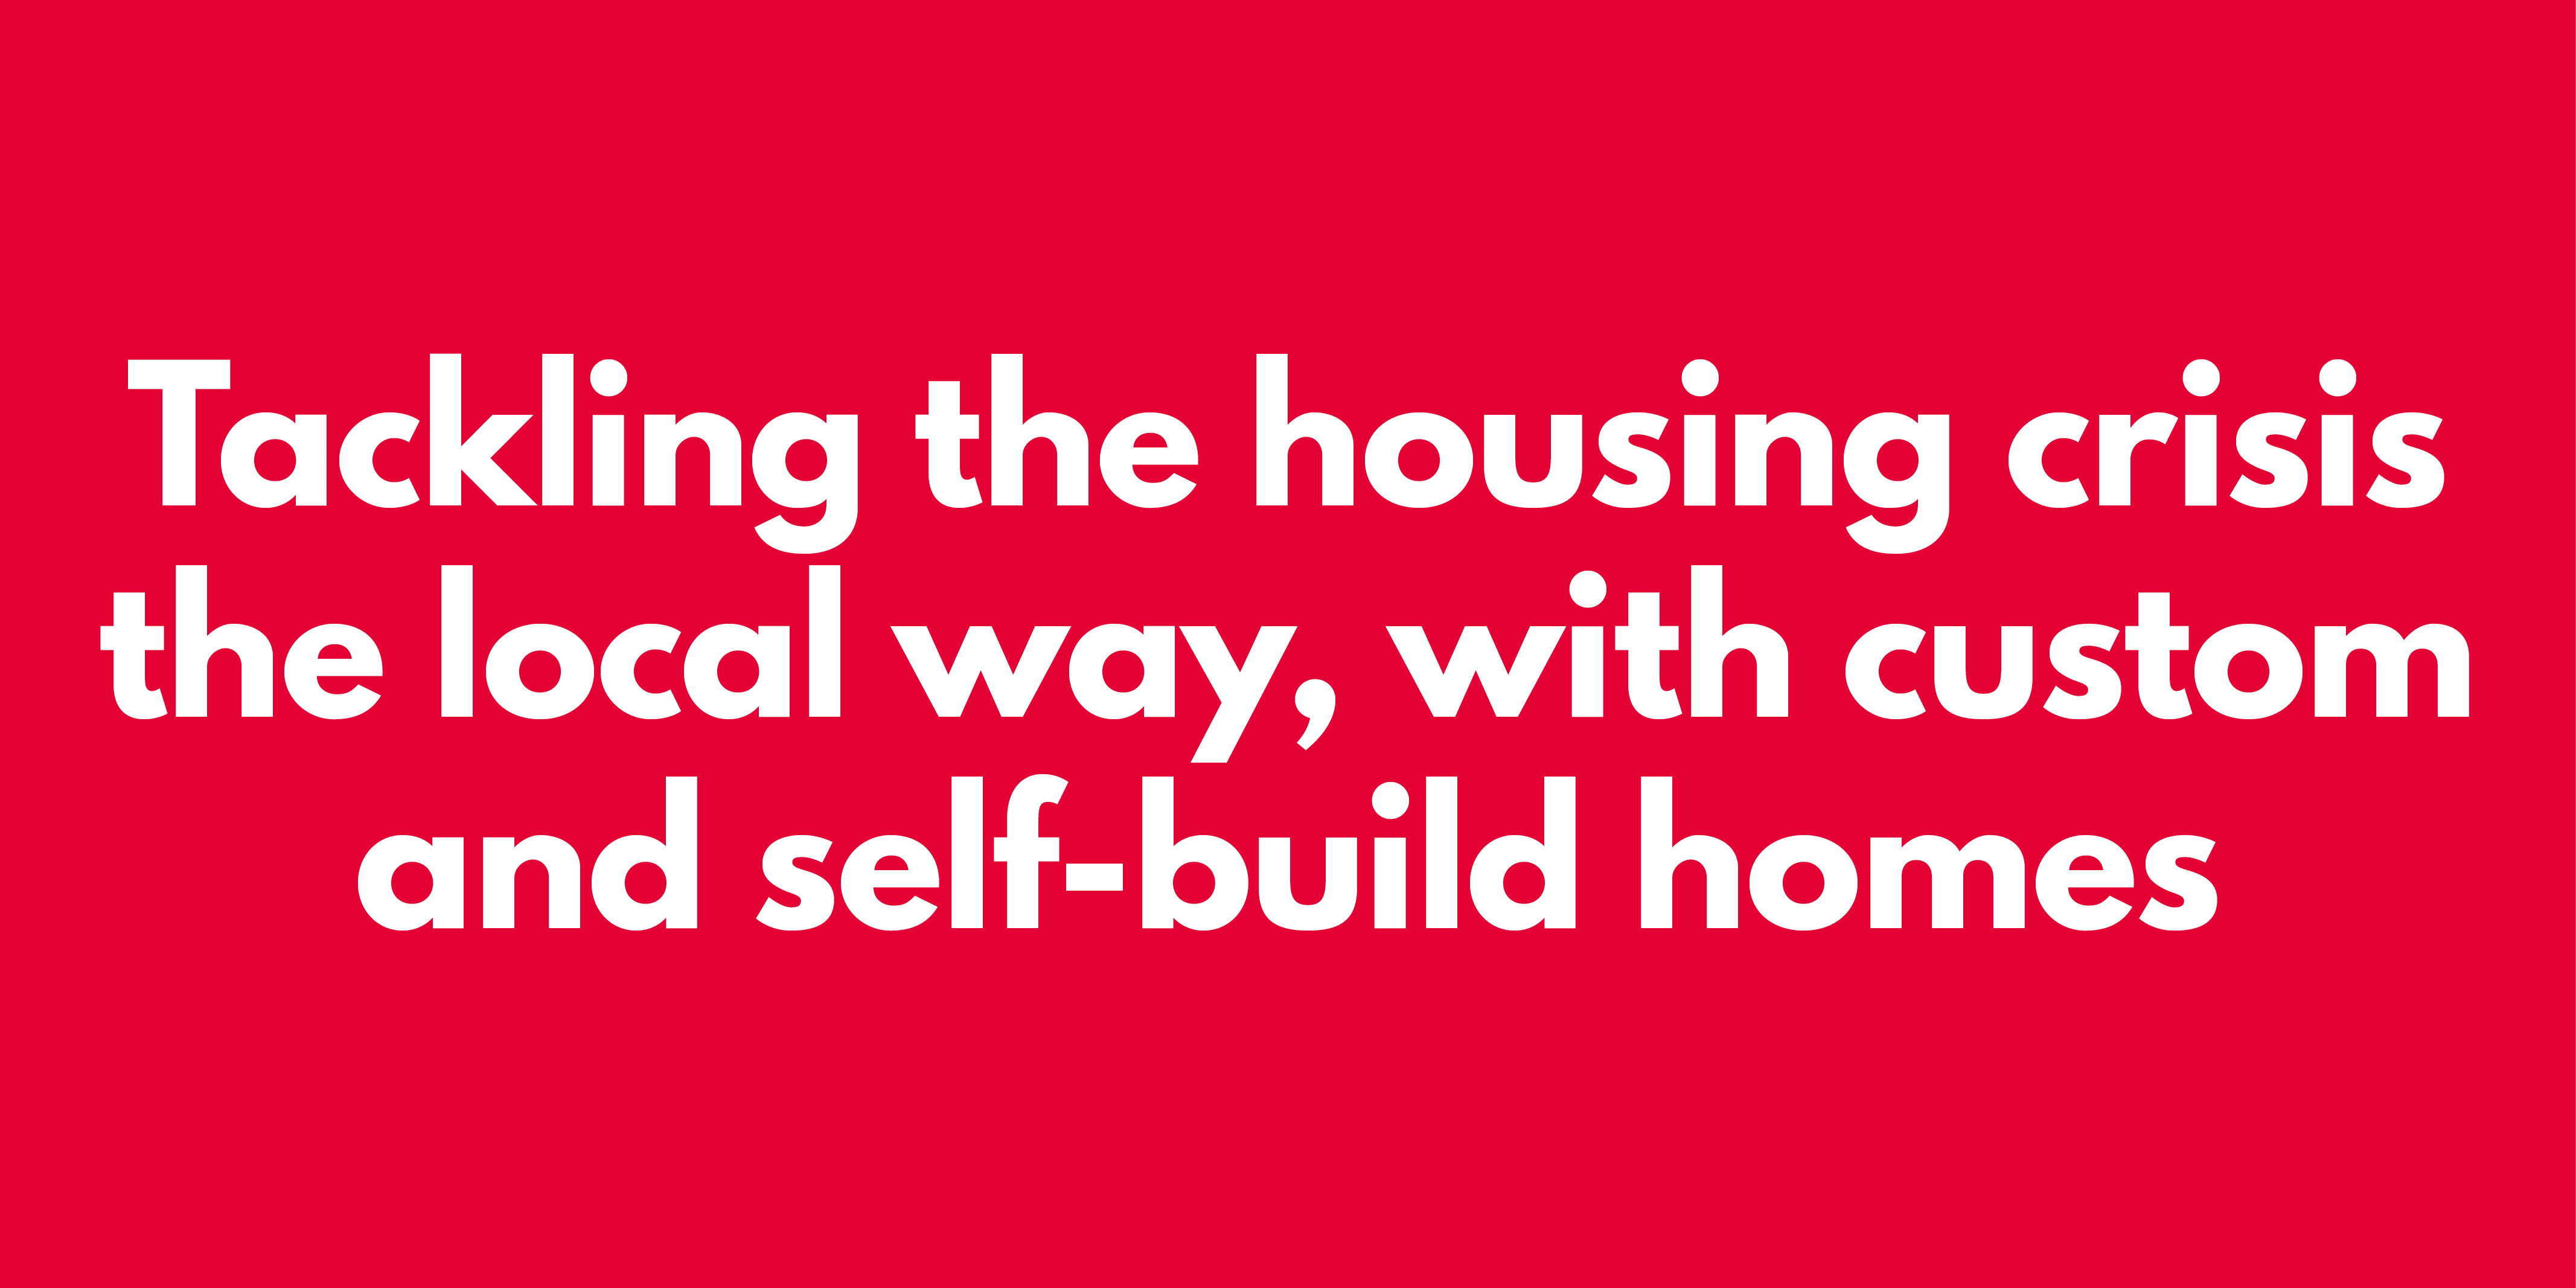 Tackling-the-housing-crisis-the-local-way-with-custom-and-self-build-homes